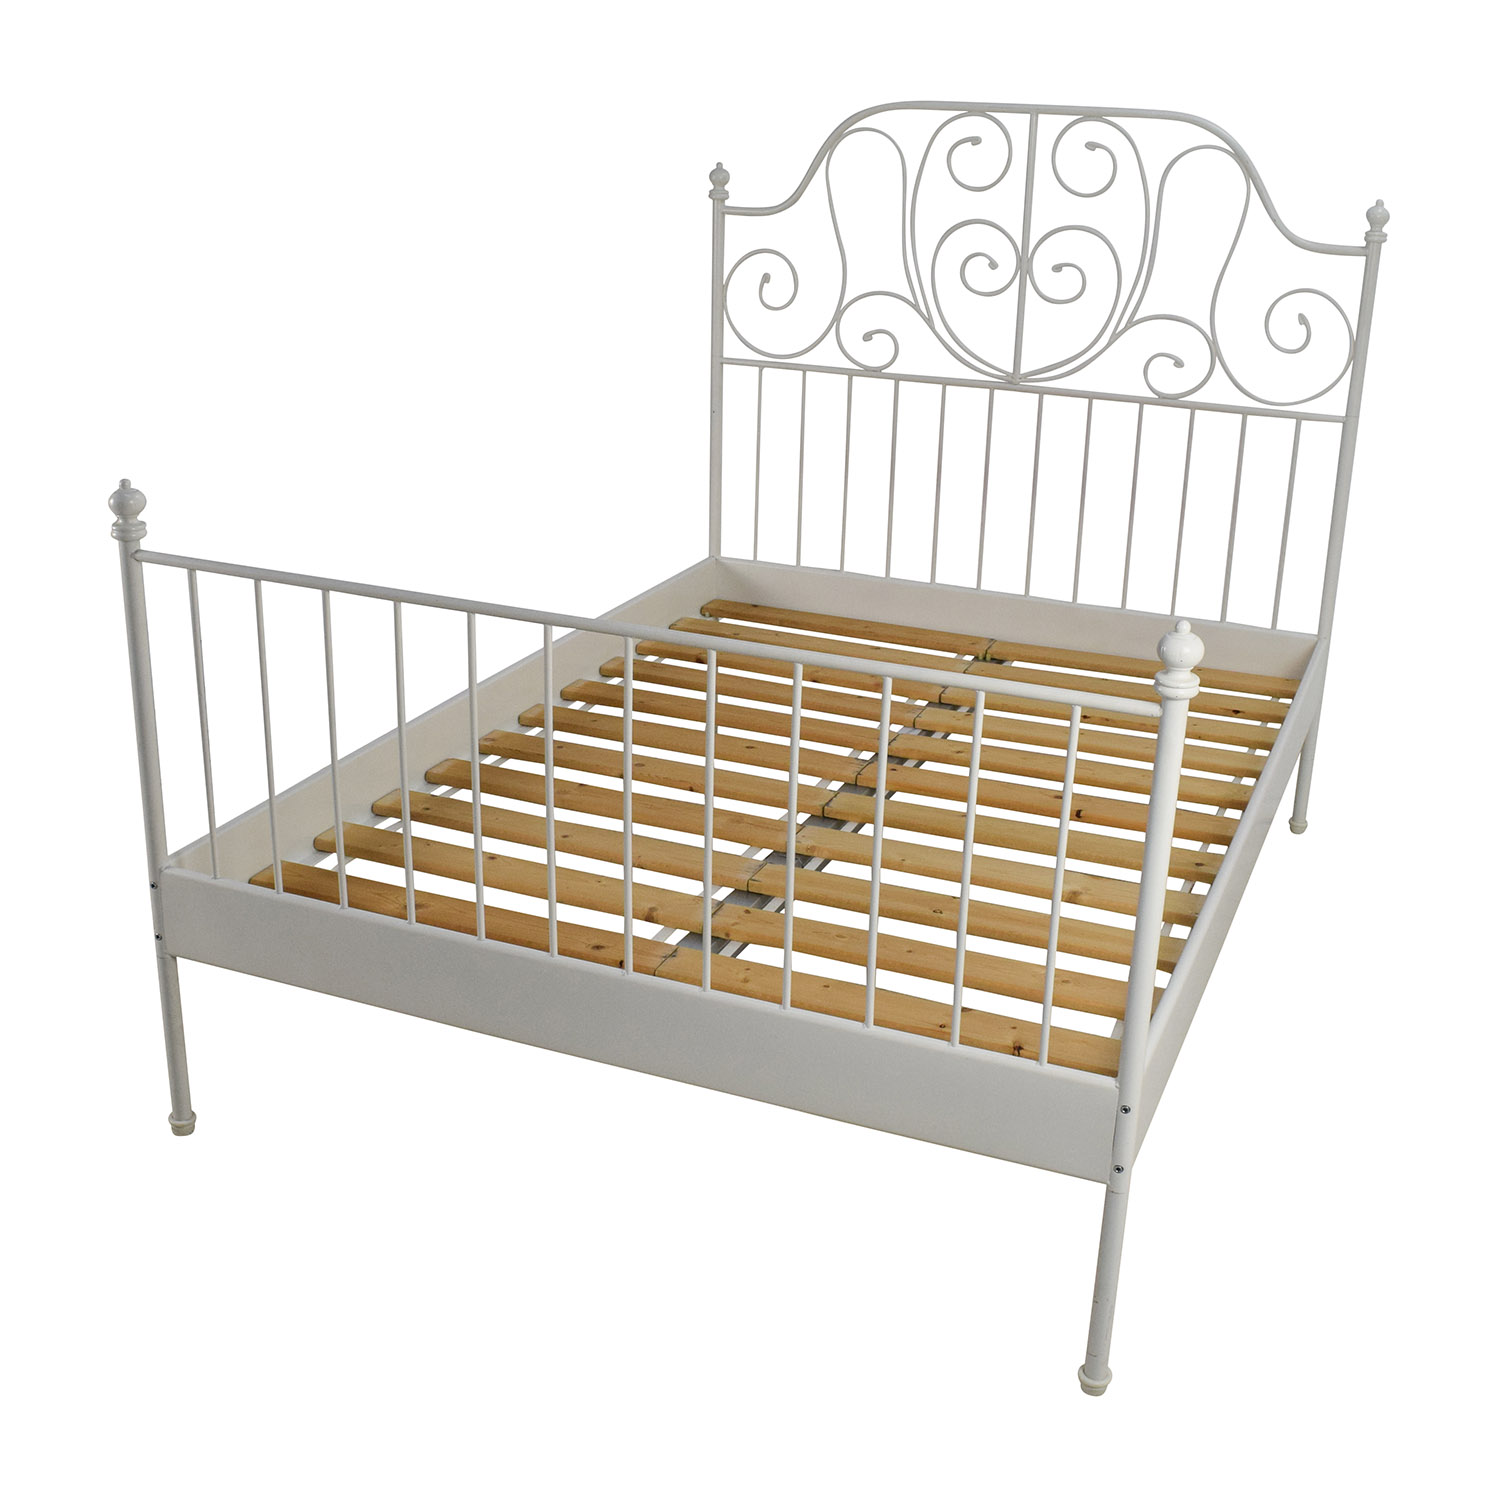 IKEA Leirvik Bed Frame Review  IKEA Product Reviews